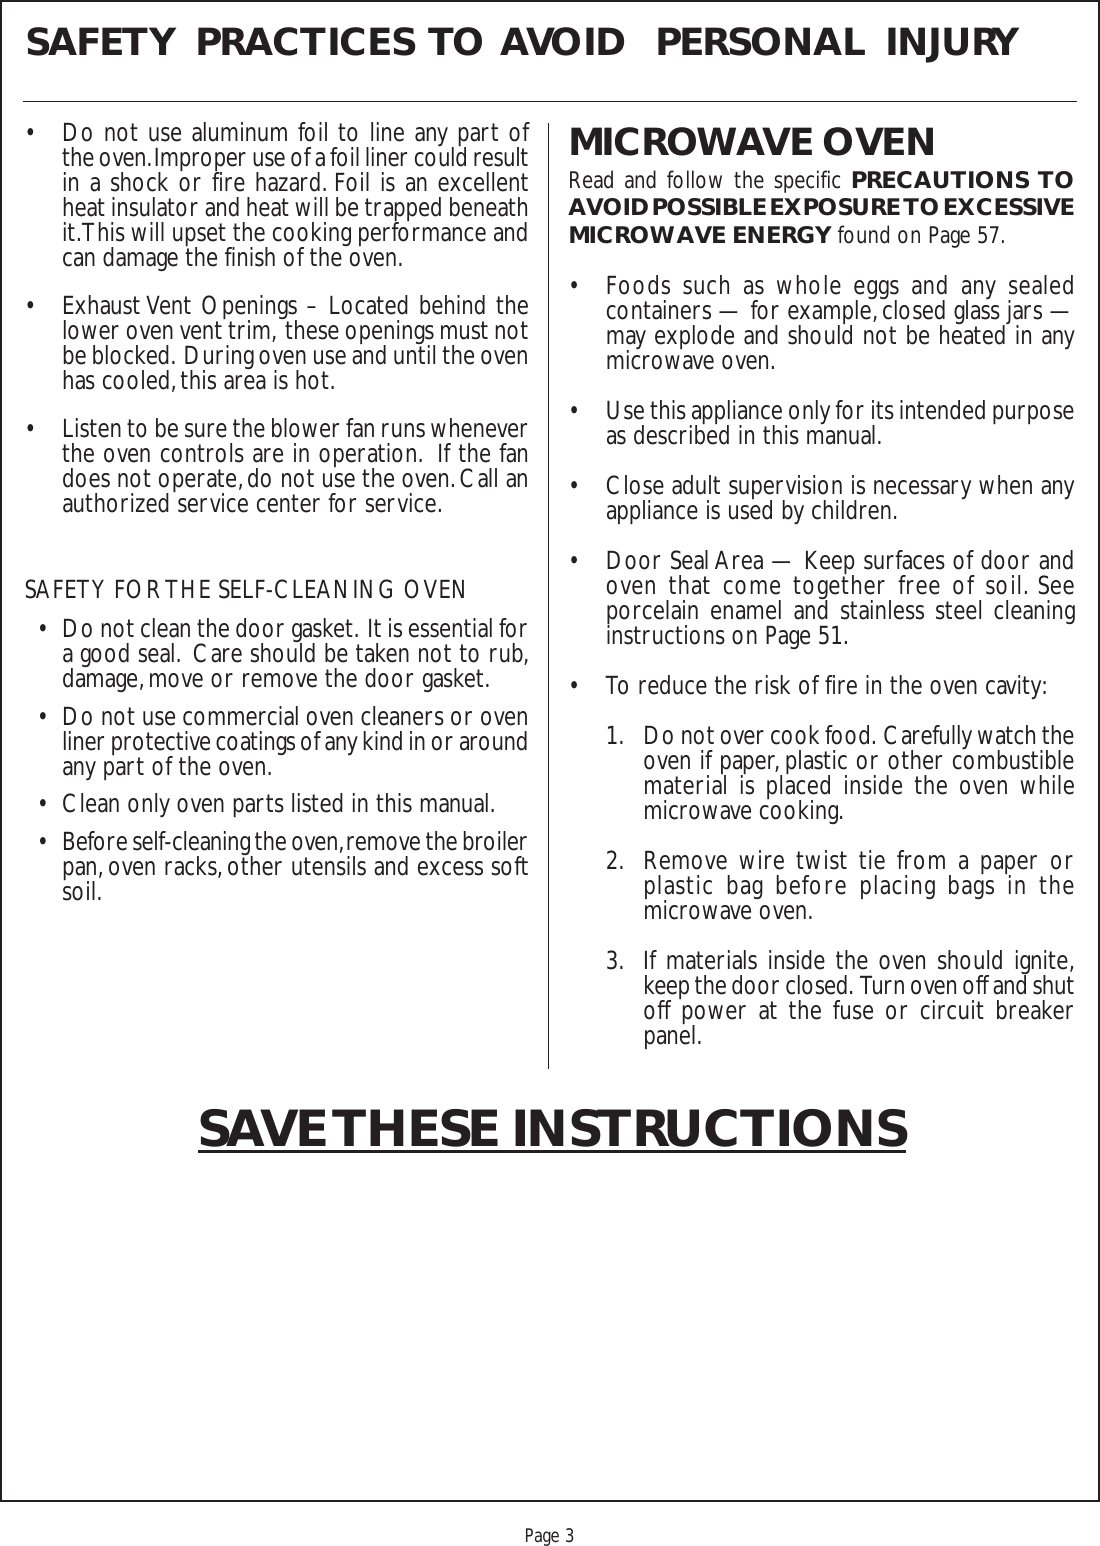 Proof 9-21-99Page 3SAFETY  PRACTICES  TO  AVOID   PERSONAL  INJURYMICROWAVE OVENRead and follow the specific PRECAUTIONS TOAVOID POSSIBLE EXPOSURE TO EXCESSIVEMICROWAVE ENERGY found on Page 57.• Foods such as whole eggs and any sealedcontainers — for example, closed glass jars —may explode and should not be heated in anymicrowave oven.• Use this appliance only for its intended purposeas described in this manual.• Close adult supervision is necessary when anyappliance is used by children.• Door Seal Area — Keep surfaces of door andoven that come together free of soil. Seeporcelain enamel and stainless steel cleaninginstructions on Page 51.• To reduce the risk of fire in the oven cavity:1. Do not over cook food.  Carefully watch theoven if paper, plastic or other combustiblematerial is placed inside the oven whilemicrowave cooking.2. Remove wire twist tie from a paper orplastic bag before placing bags in themicrowave oven.3. If materials inside the oven should ignite,keep the door closed.  Turn oven off and shutoff power at the fuse or circuit breakerpanel.SAVE THESE INSTRUCTIONS• Do not use aluminum foil to line any part ofthe oven. Improper use of a foil liner could resultin a shock or fire hazard. Foil is an excellentheat insulator and heat will be trapped beneathit. This will upset the cooking performance andcan damage the finish of the oven.• Exhaust Vent Openings – Located behind thelower oven vent trim,  these openings must notbe blocked.  During oven use and until the ovenhas cooled, this area is hot.• Listen to be sure the blower fan runs wheneverthe oven controls are in operation.  If the fandoes not operate, do not use the oven. Call anauthorized service center for service.SAFETY FOR THE SELF-CLEANING OVEN• Do not clean the door gasket.  It is essential fora good seal.  Care should be taken not to rub,damage, move or remove the door gasket.• Do not use commercial oven cleaners or ovenliner protective coatings of any kind in or aroundany part of the oven.• Clean only oven parts listed in this manual.• Before self-cleaning the oven, remove the broilerpan, oven racks, other utensils and excess softsoil.